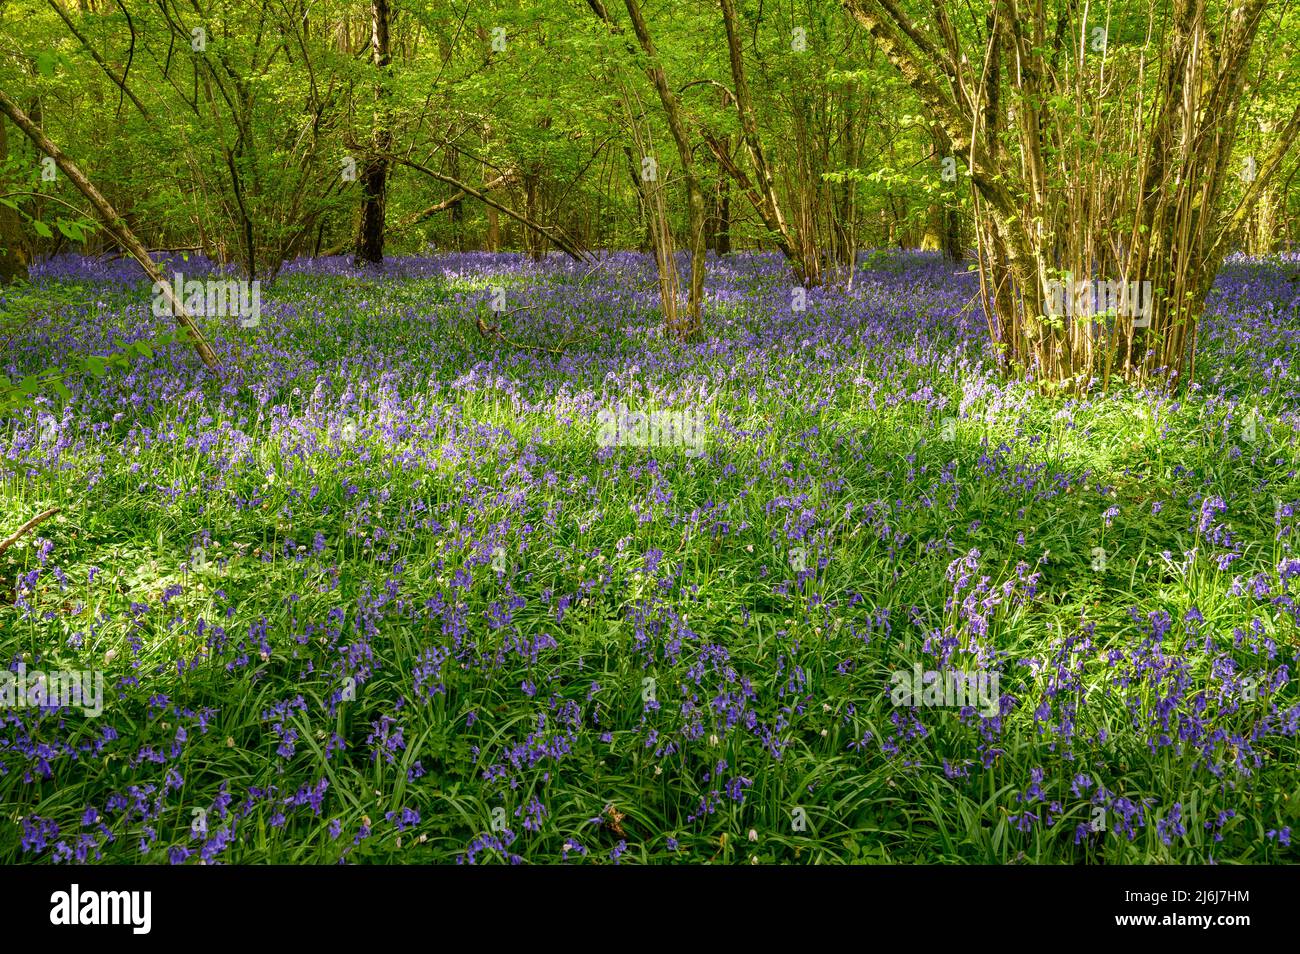 Dappled sunlight shining on trees and bluebells covering the forest floor in a wood on the outskirts of Billingshurst in West Sussex, England. Stock Photo